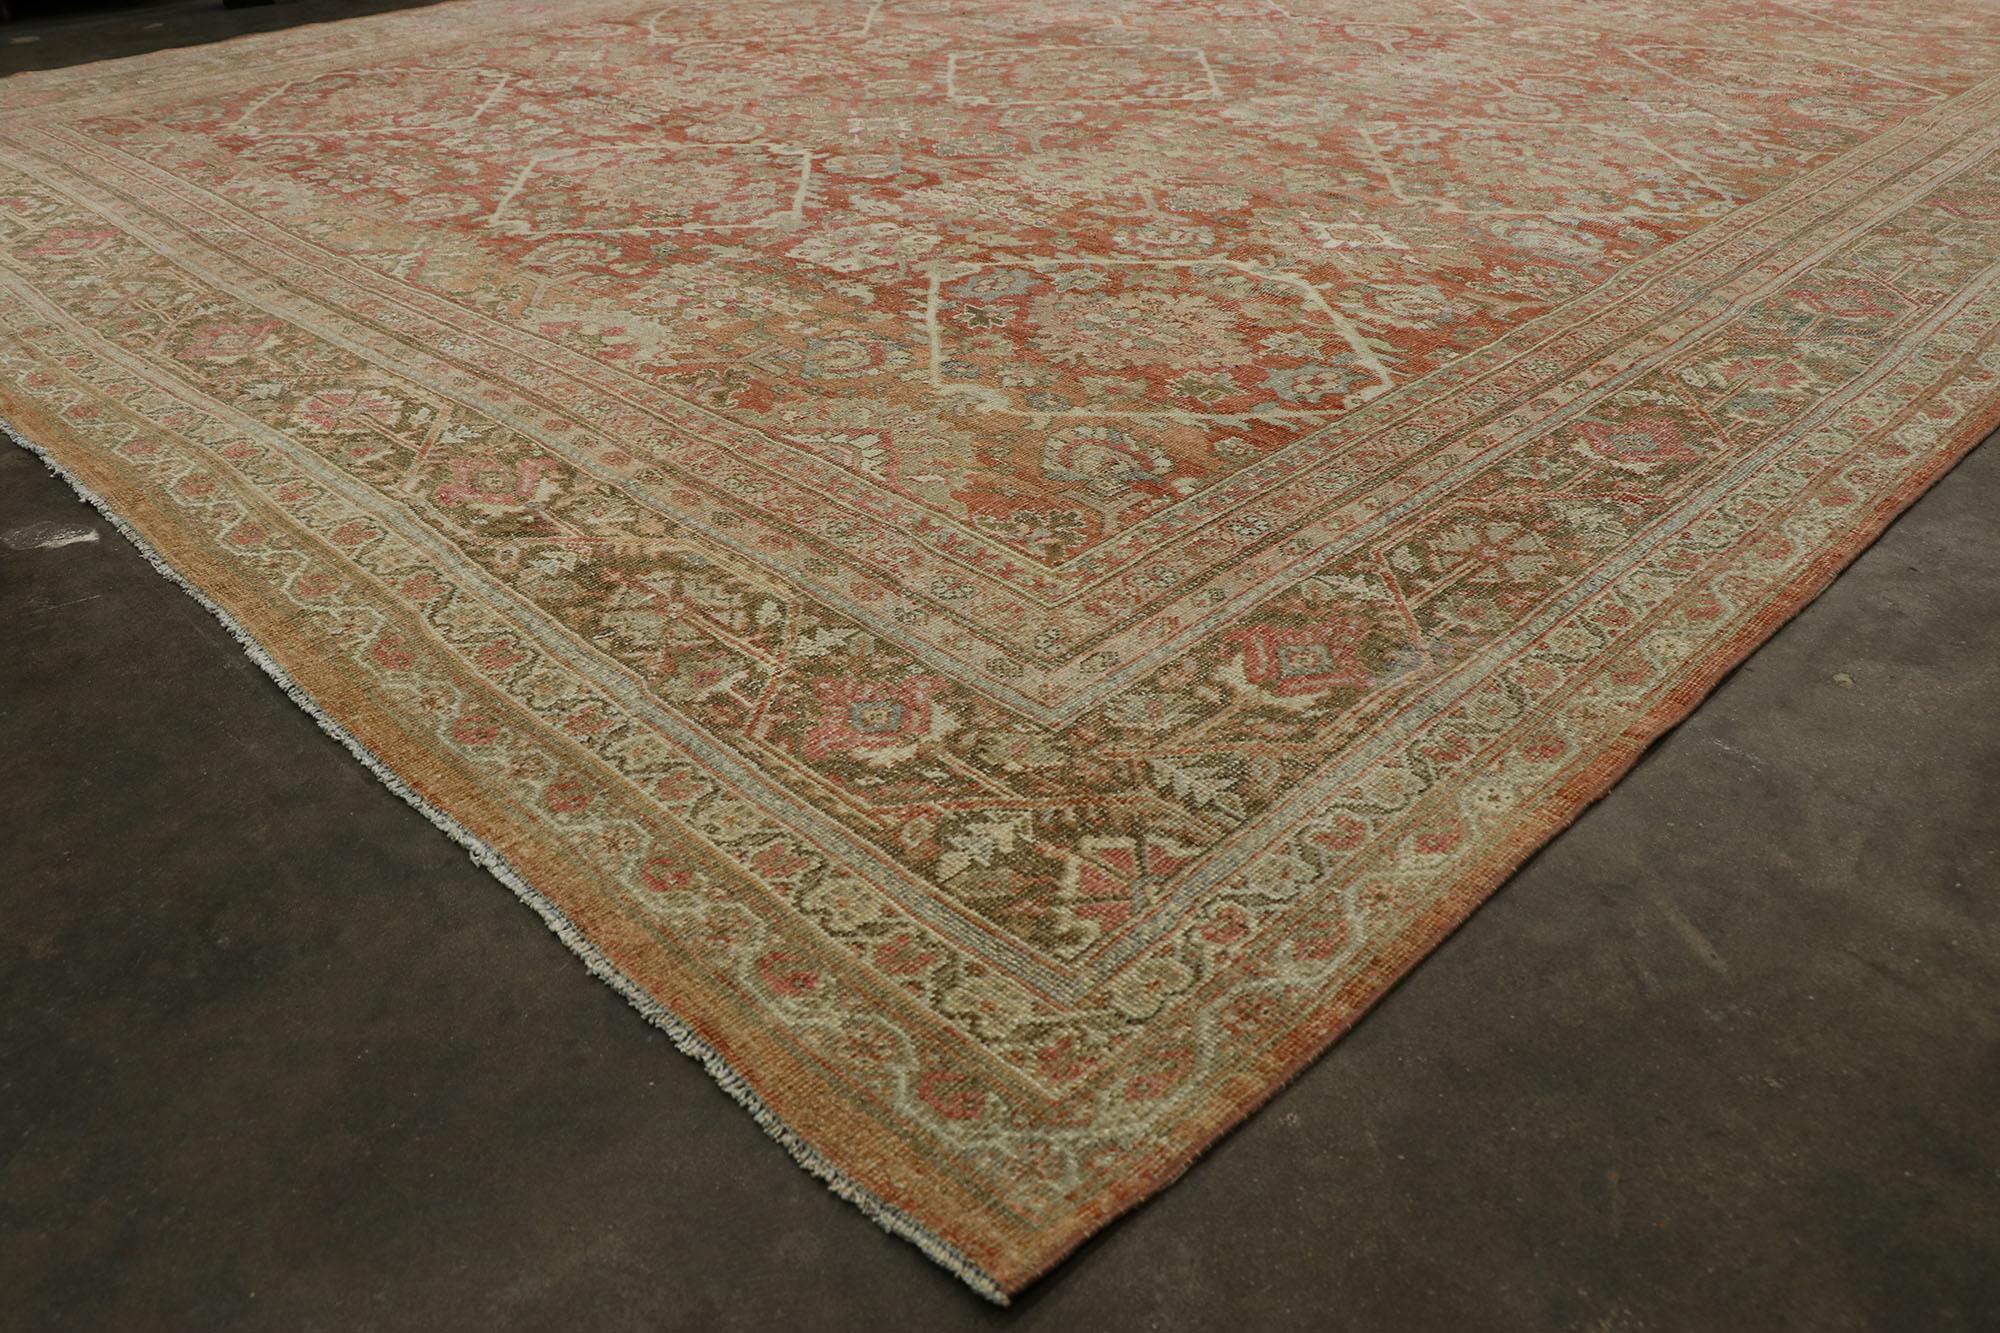 Distressed Antique Persian Mahal Rug with Rustic Spanish Mission Style 1